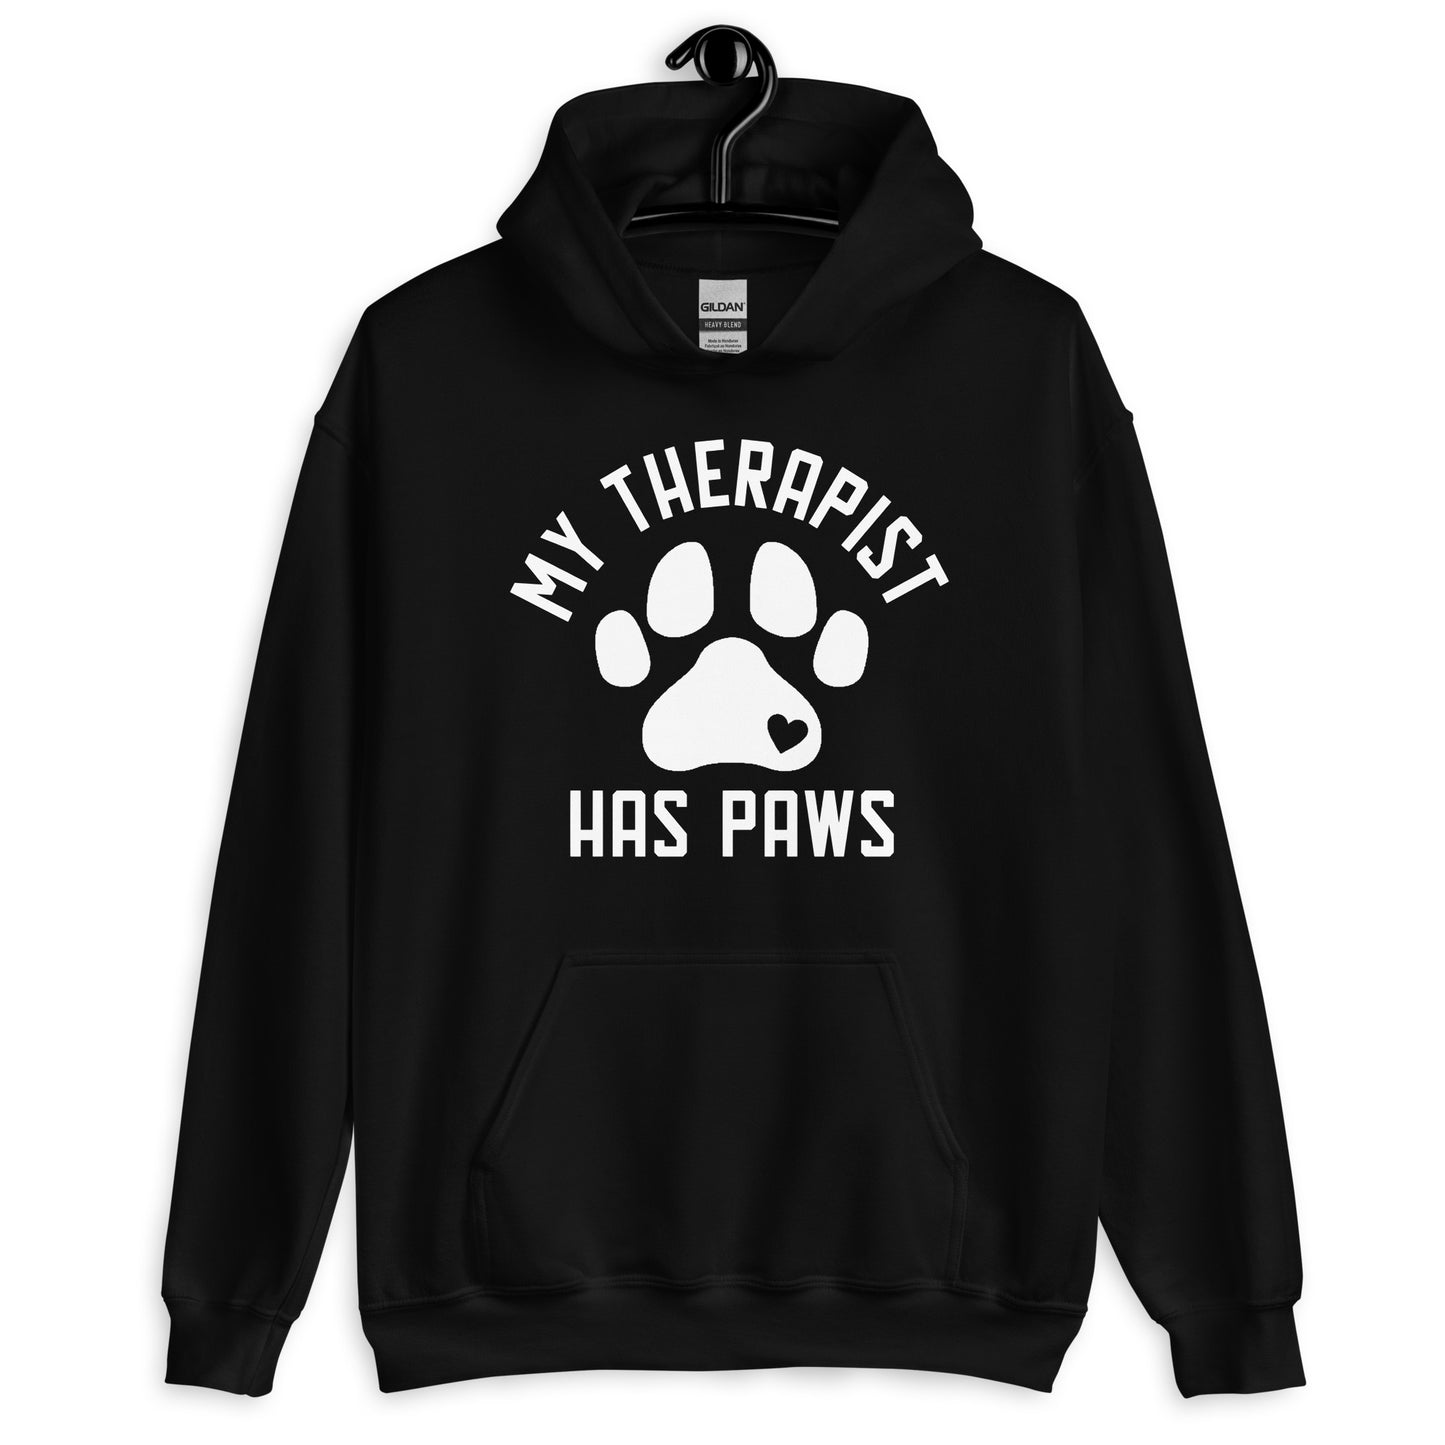 My Therapist Has Paws Hoodie